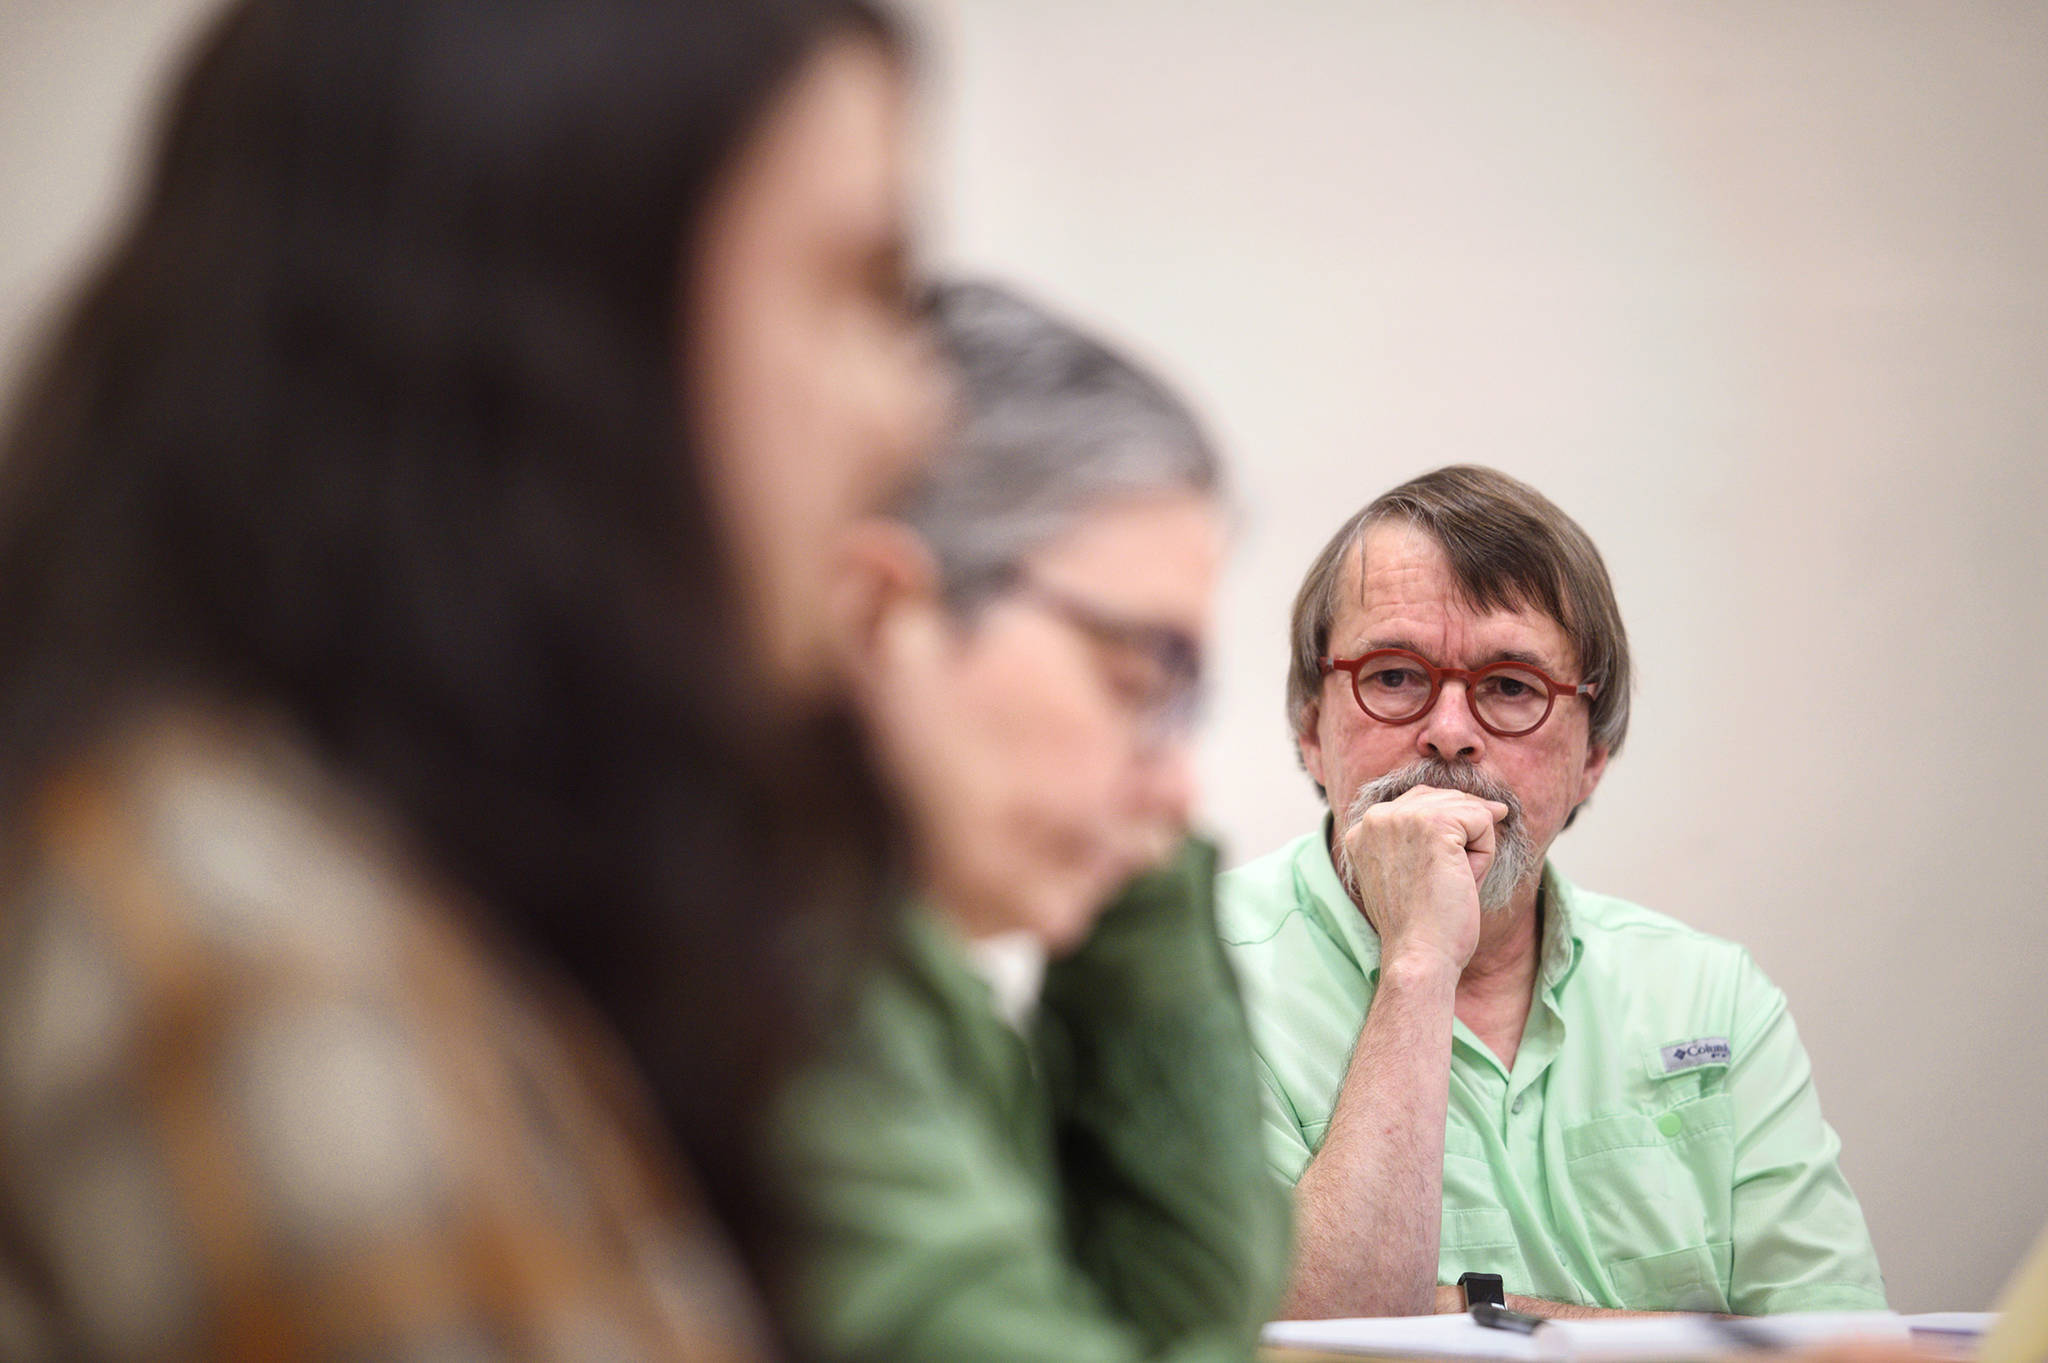 KTOO President and General Manager Bill Legere watches public testimony at the public radio station’s board meeting on Monday, Sept. 10, 2018. (Michael Penn | Juneau Empire)